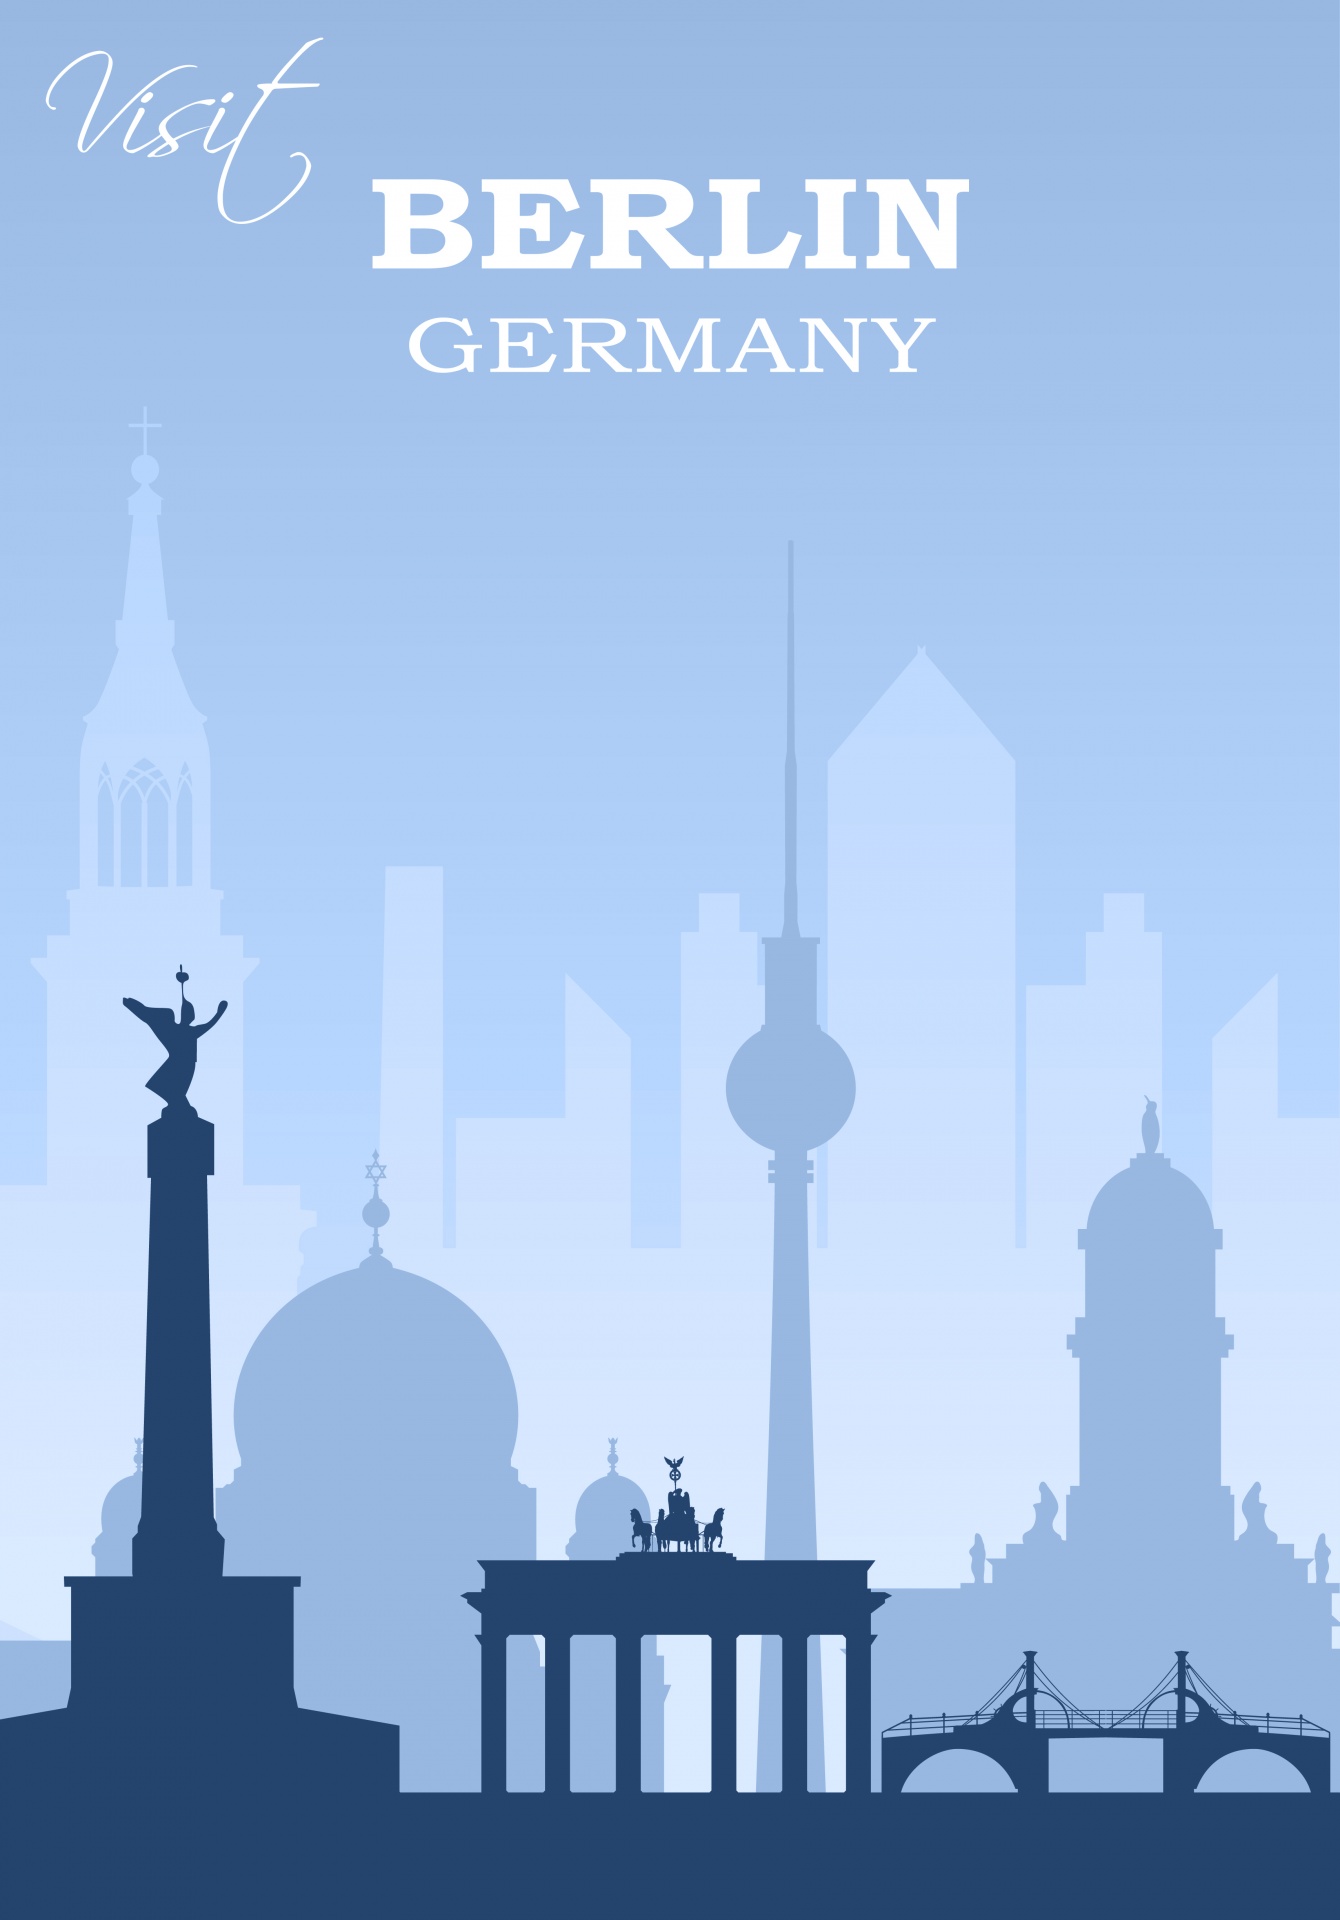 Modern travel Poster for Berlin, Germany in blue tones with city skyline and landmarks backdrop